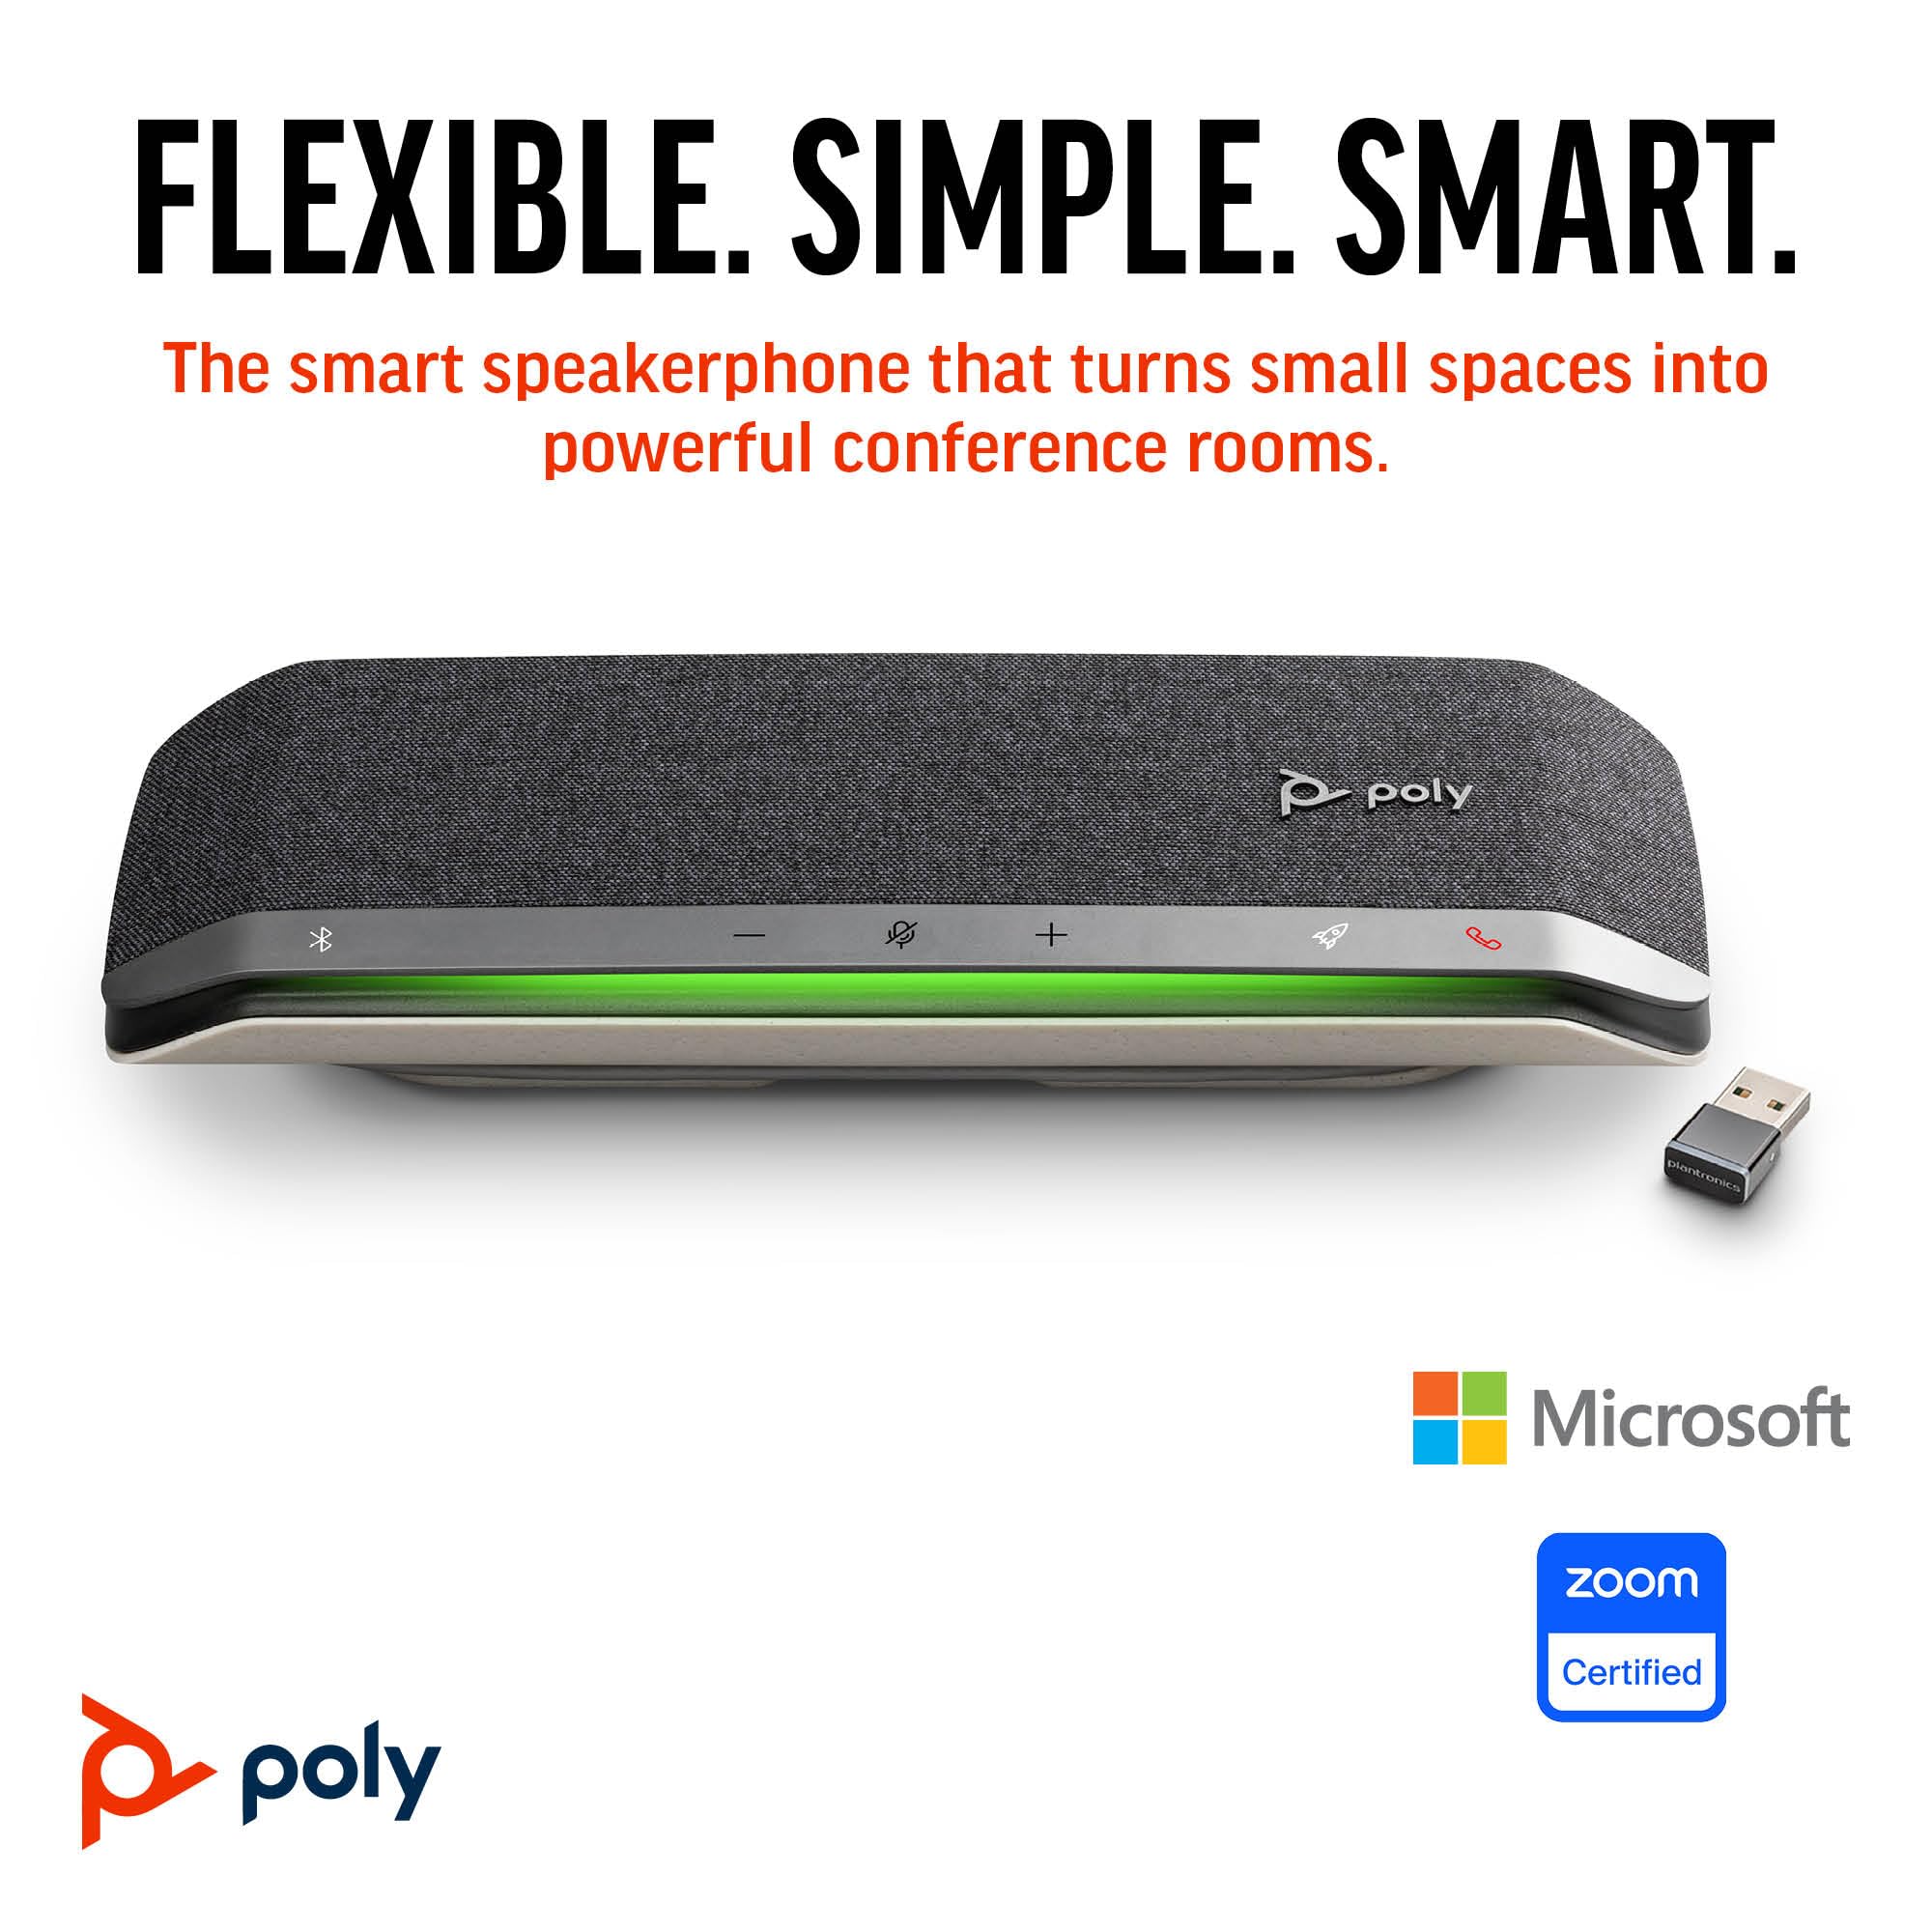 Poly Sync 40+ Smart Speakerphone (Plantronics) - Flexible Workspaces - Connect to PC/Mac via BT700 Adapter and Smartphones via Bluetooth - Works with Teams, Zoom – Amazon Exclusive